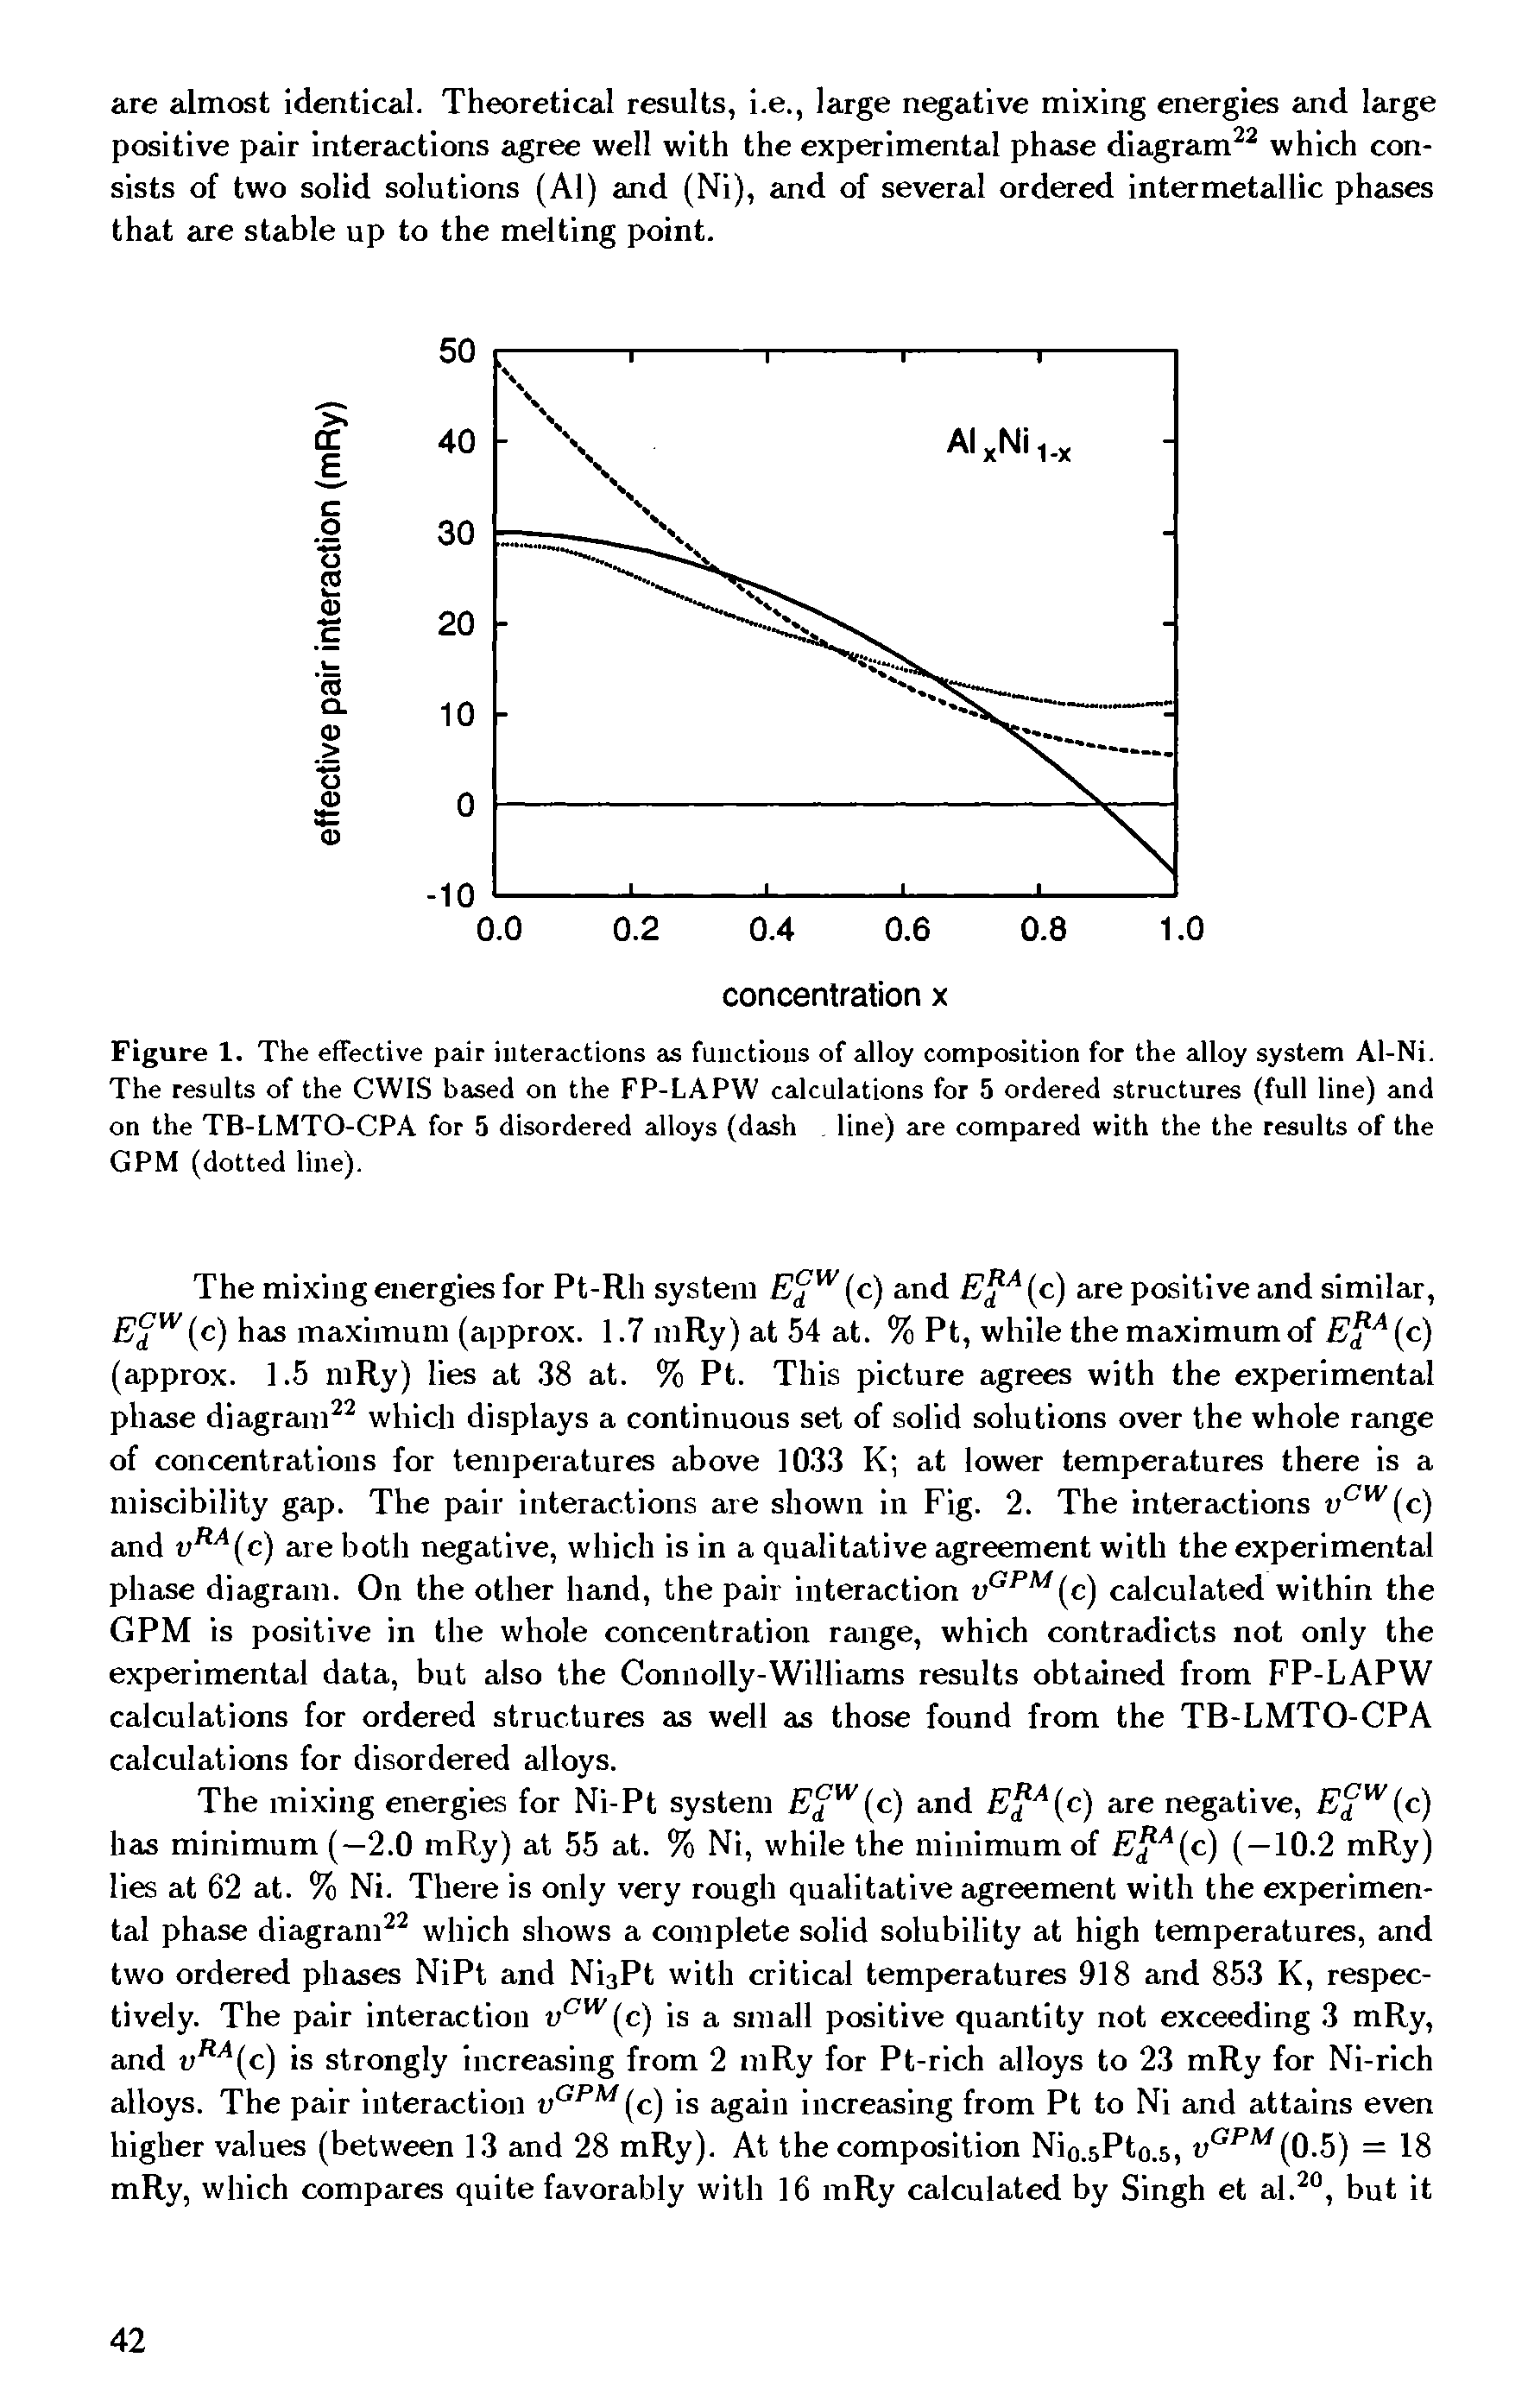 Figure 1. The effective pair interactions as functions of alloy composition for the alloy system Al-Ni. The results of the CWIS based on the FP-LAPW calculations for 5 ordered structures (full line) and on the TB-LMTO-CPA for 5 disordered alloys (dash line) are compared with the the results of the GPM (dotted line).